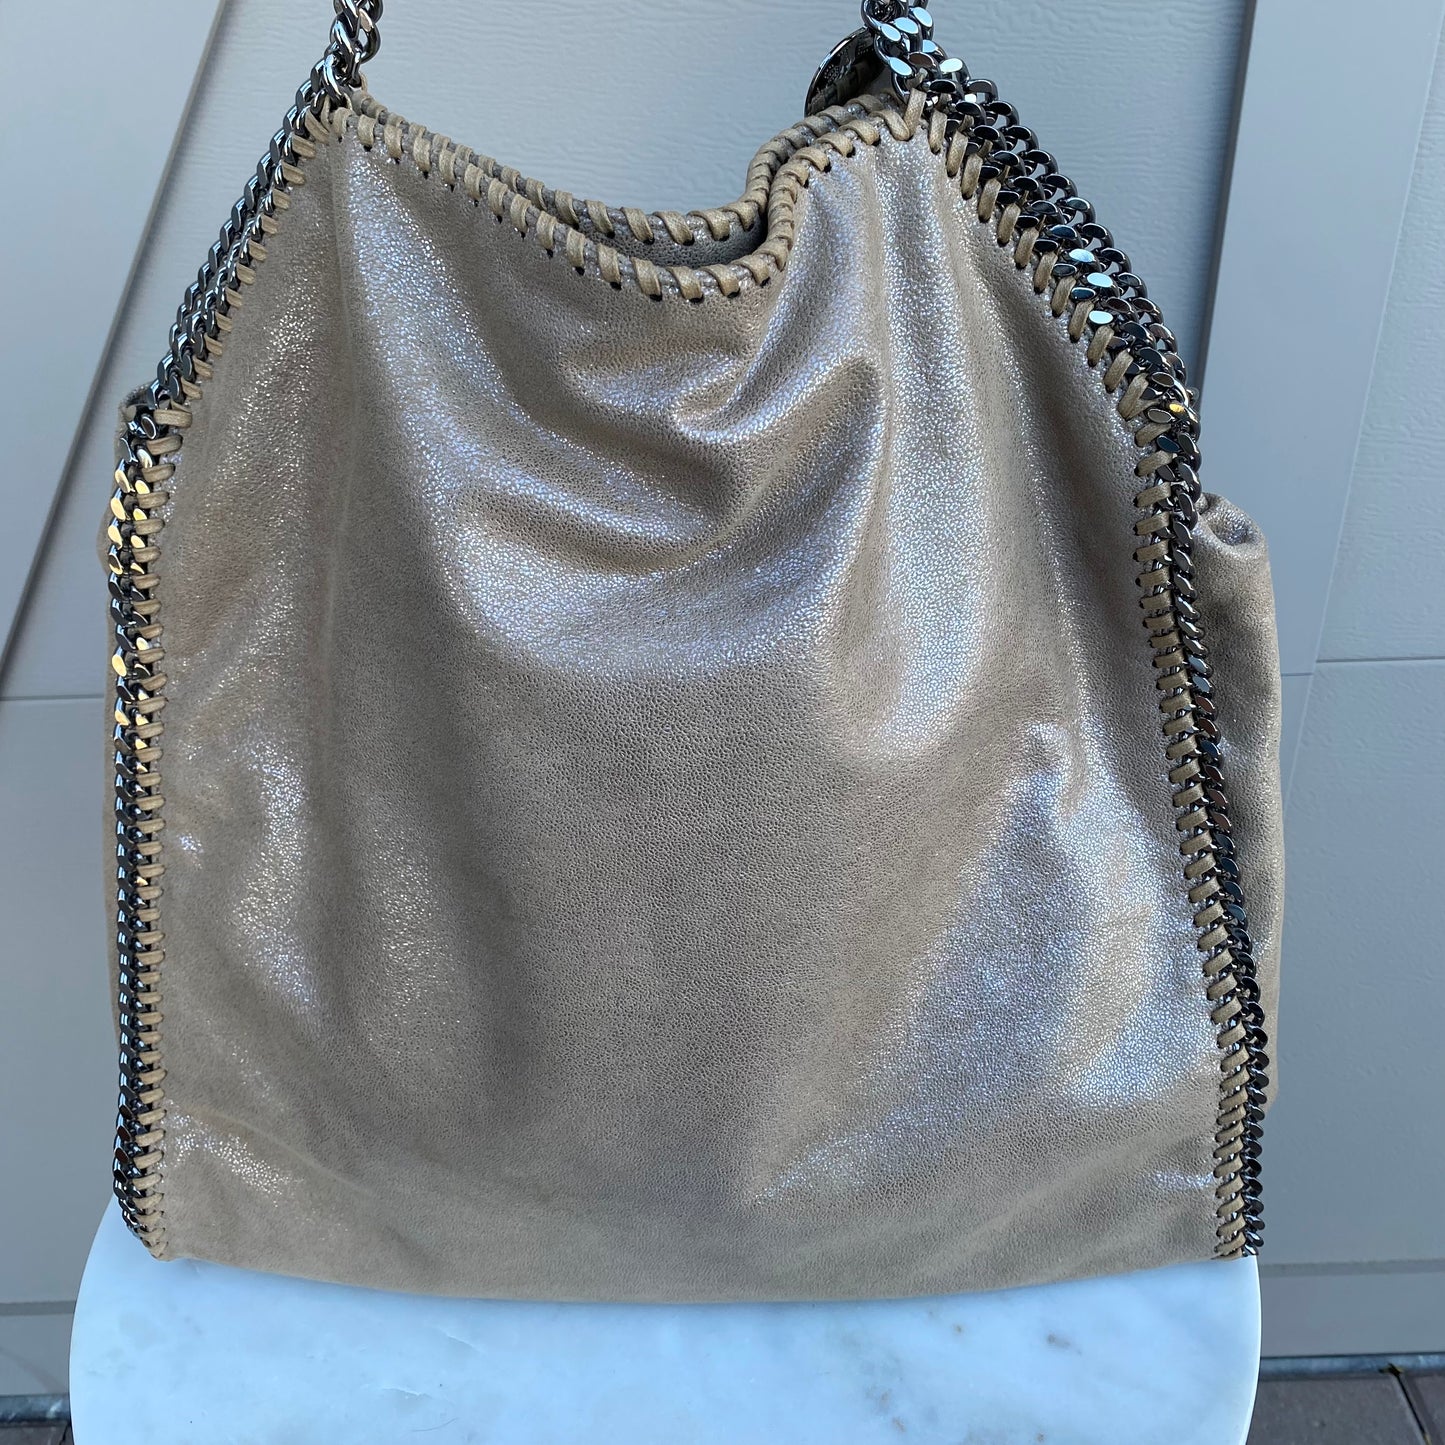 Stella McCartney Shaggy Deer Large Falabella with Pouch